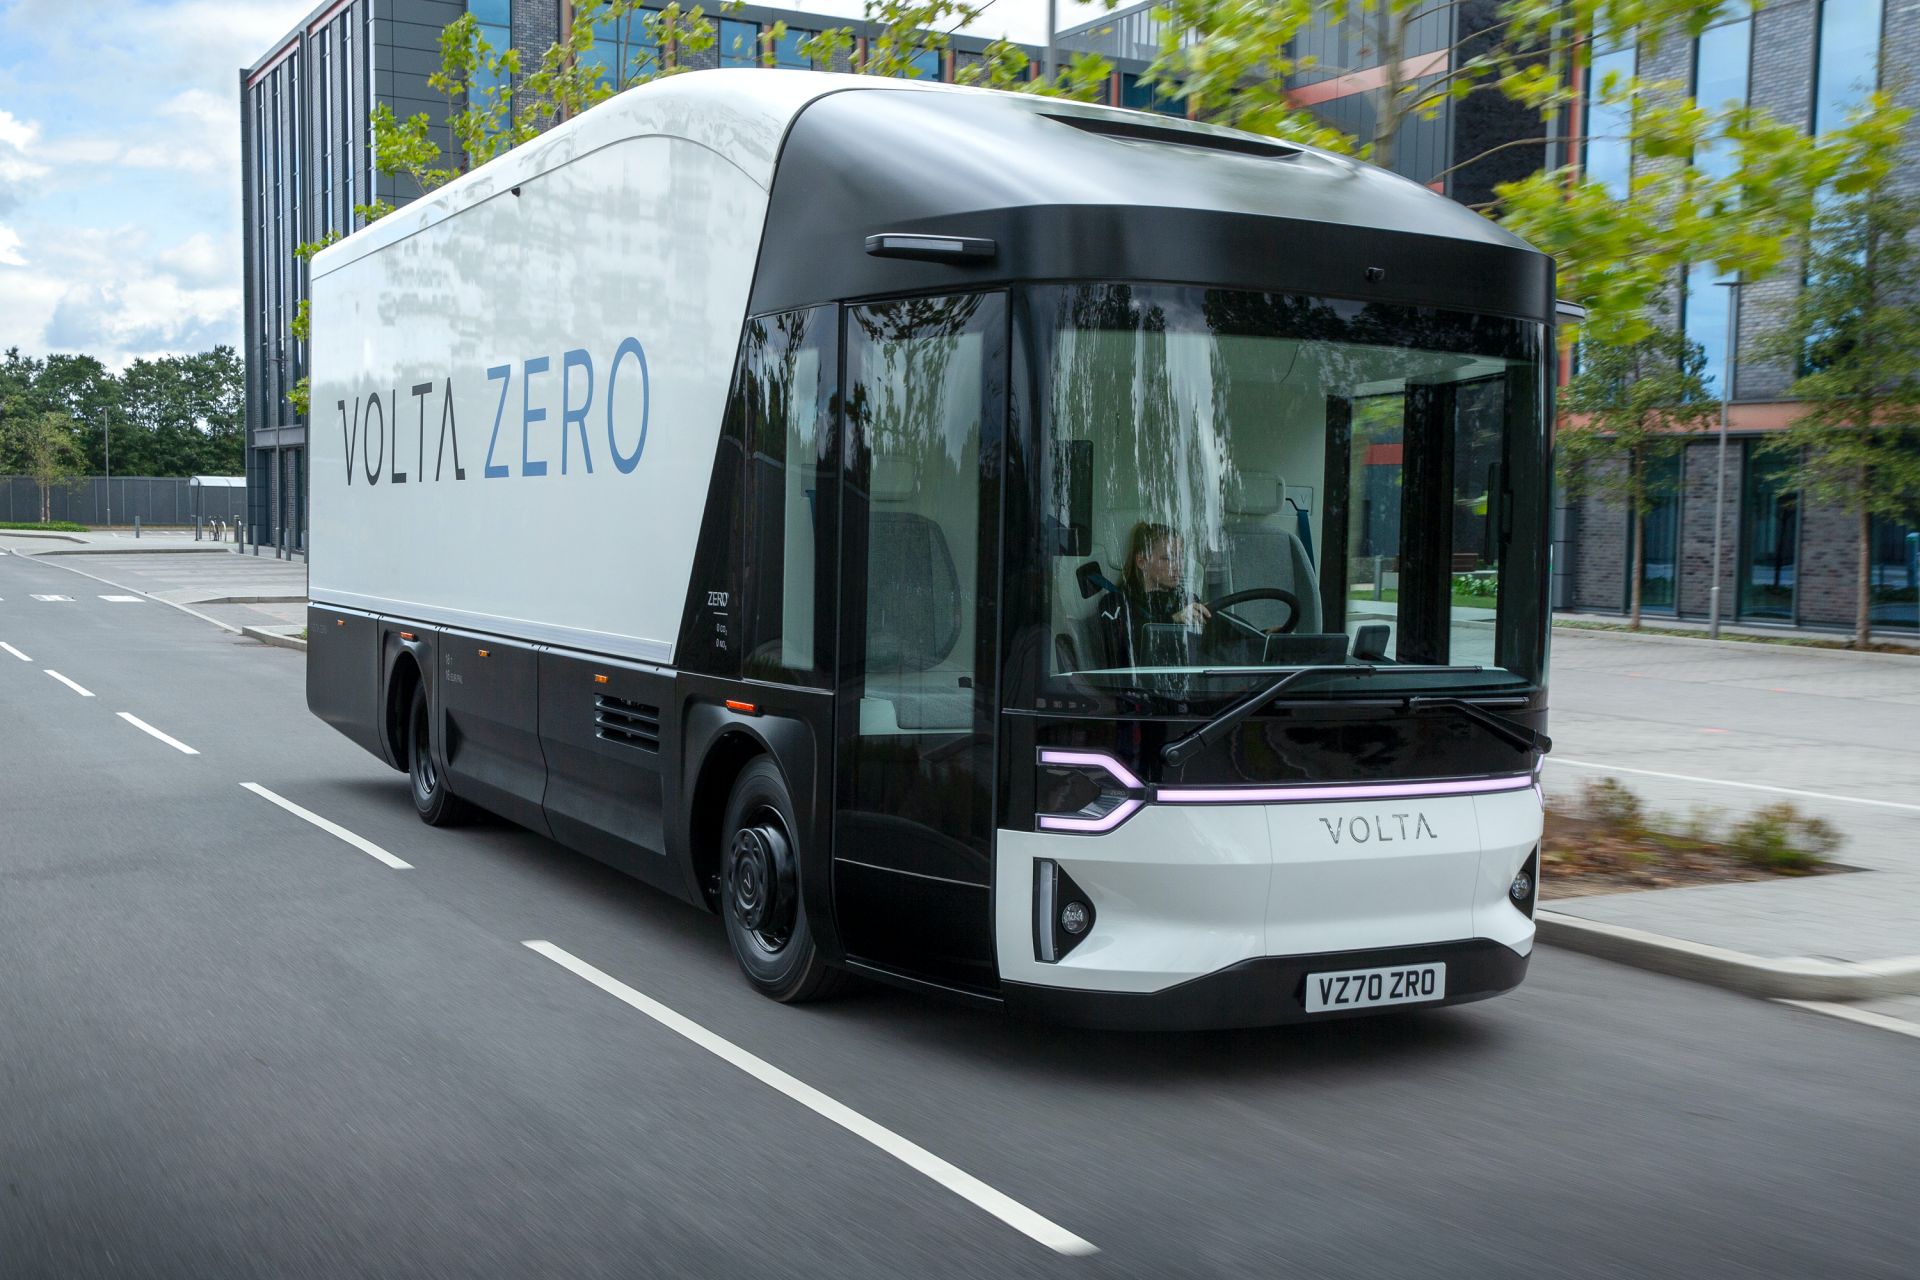 Volta Zero Is A 16Tonne Electric Truck With A Central Driving Position